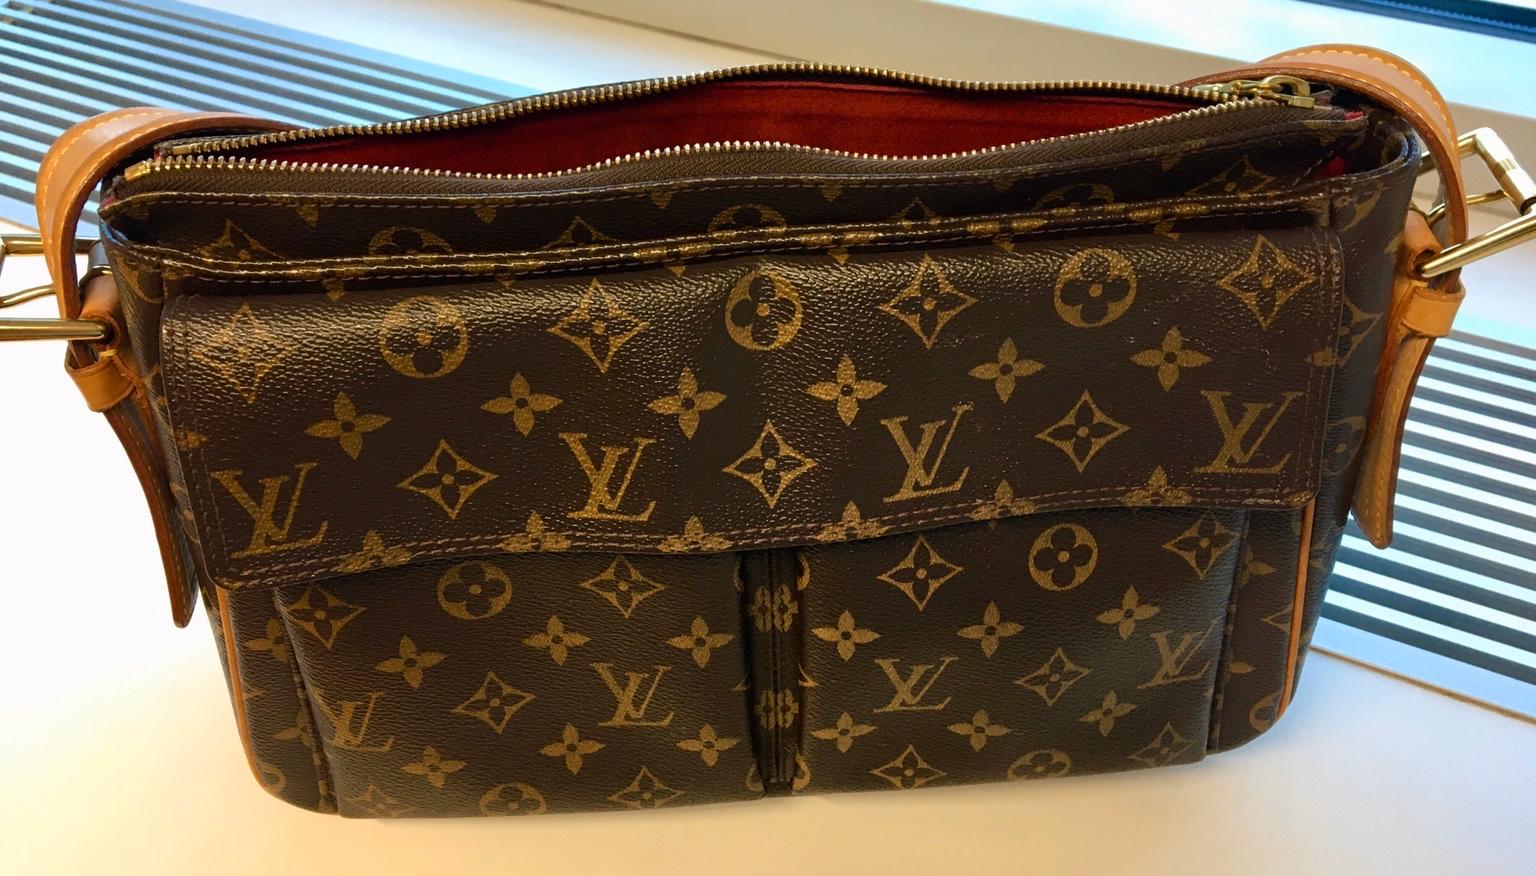 Louis Vuitton Handtasche in 1220 KG Kagran for €560.00 for sale | Shpock